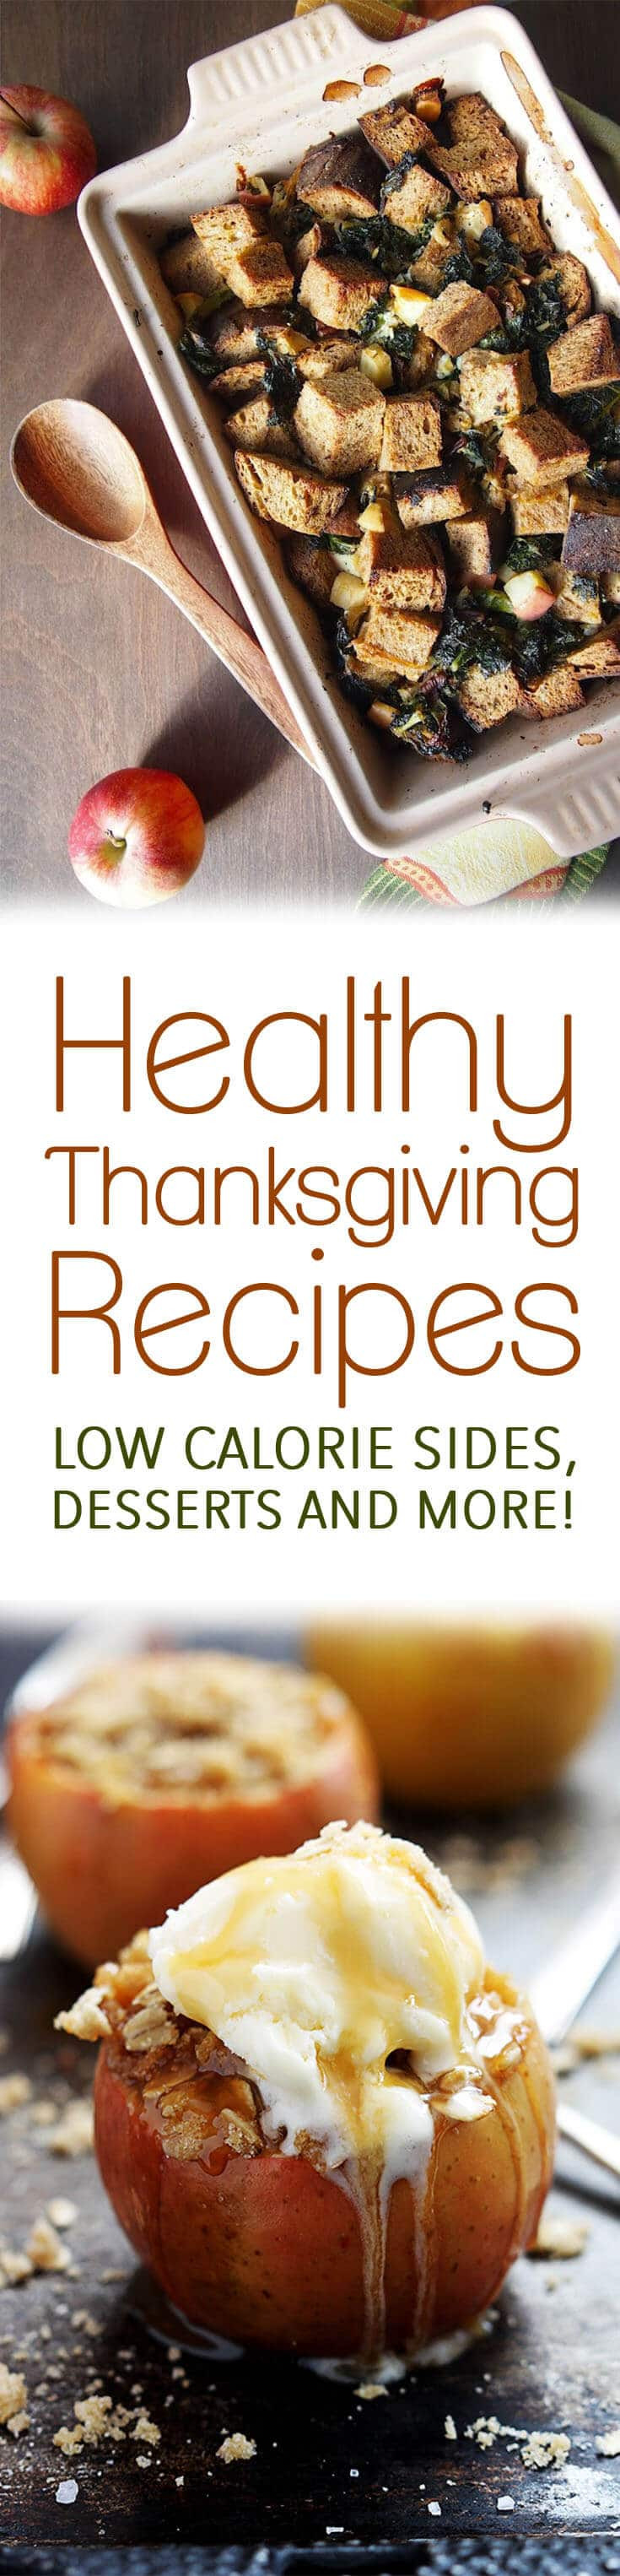 Thanksgiving Desserts List
 10 Best Healthy Thanksgiving Recipes for Low Calorie Sides